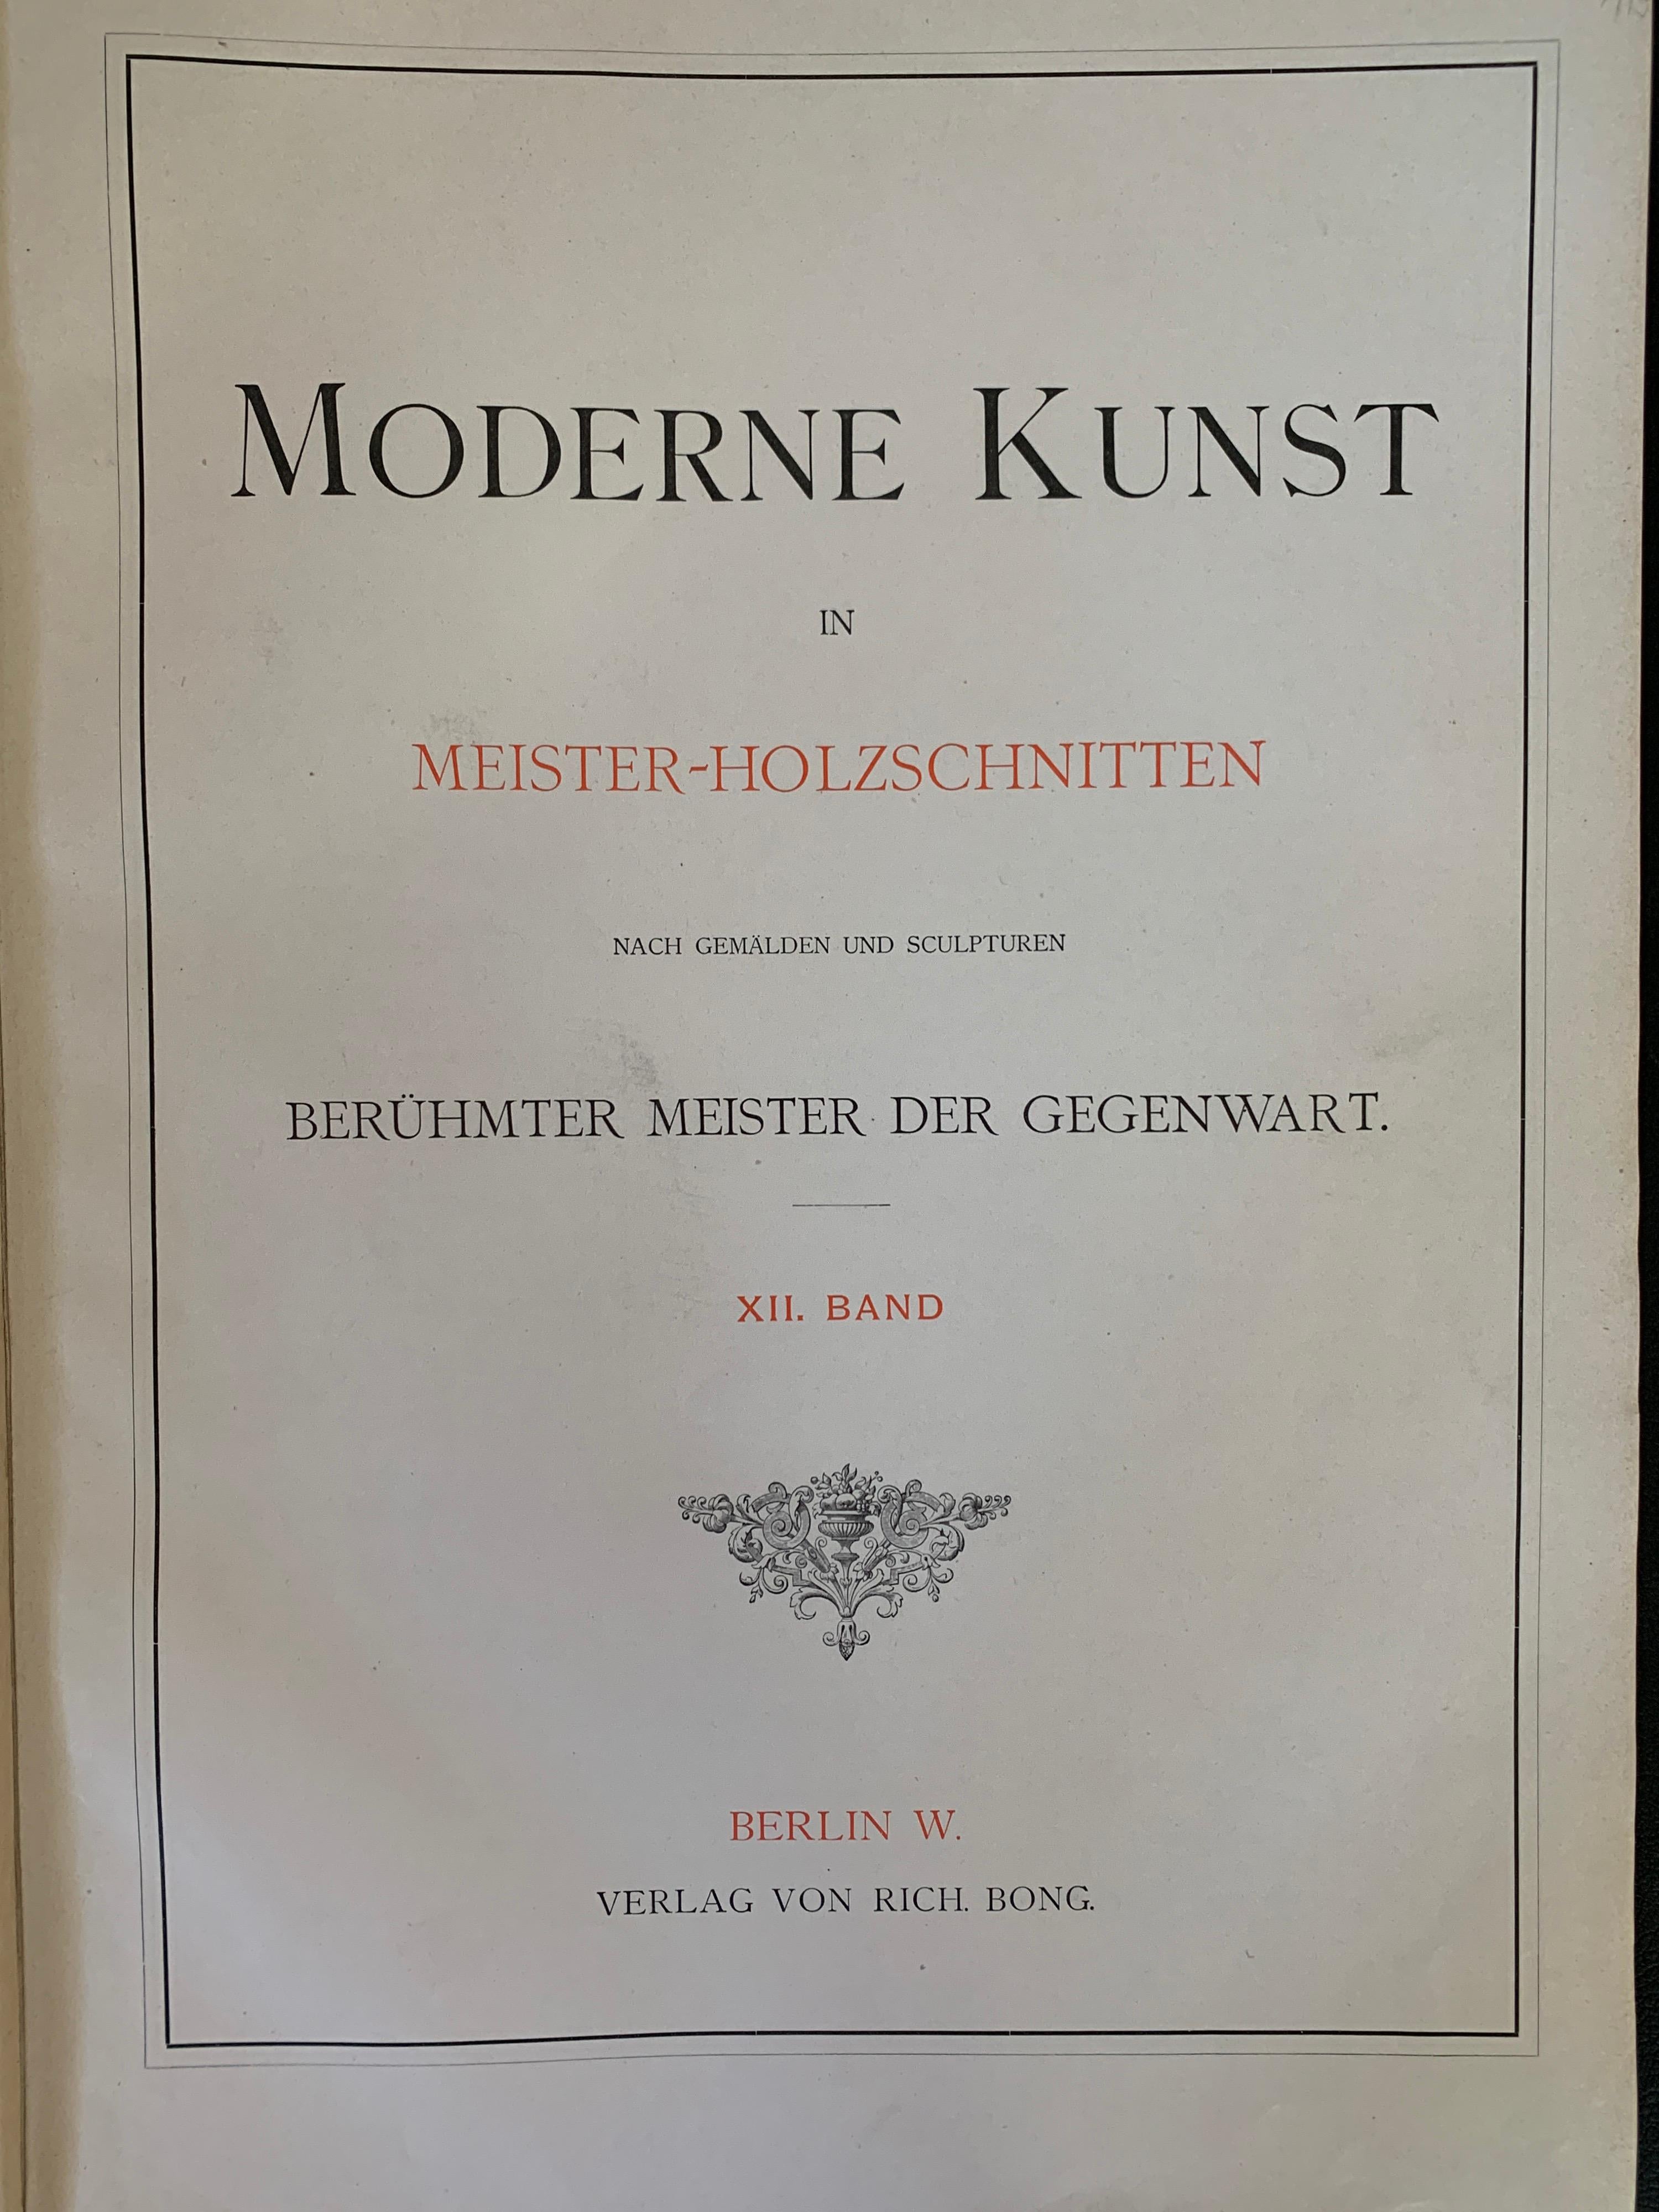 Moderne Kunst in Meister-Holzschnitten
Uitgever Richard Bong Berlijn W.- In a beautiful burgundy Jugendstil binding, richly decorated with gold and color 
- Wood engravings after paintings and sculptures by famous masters. 
- Richly illustrated